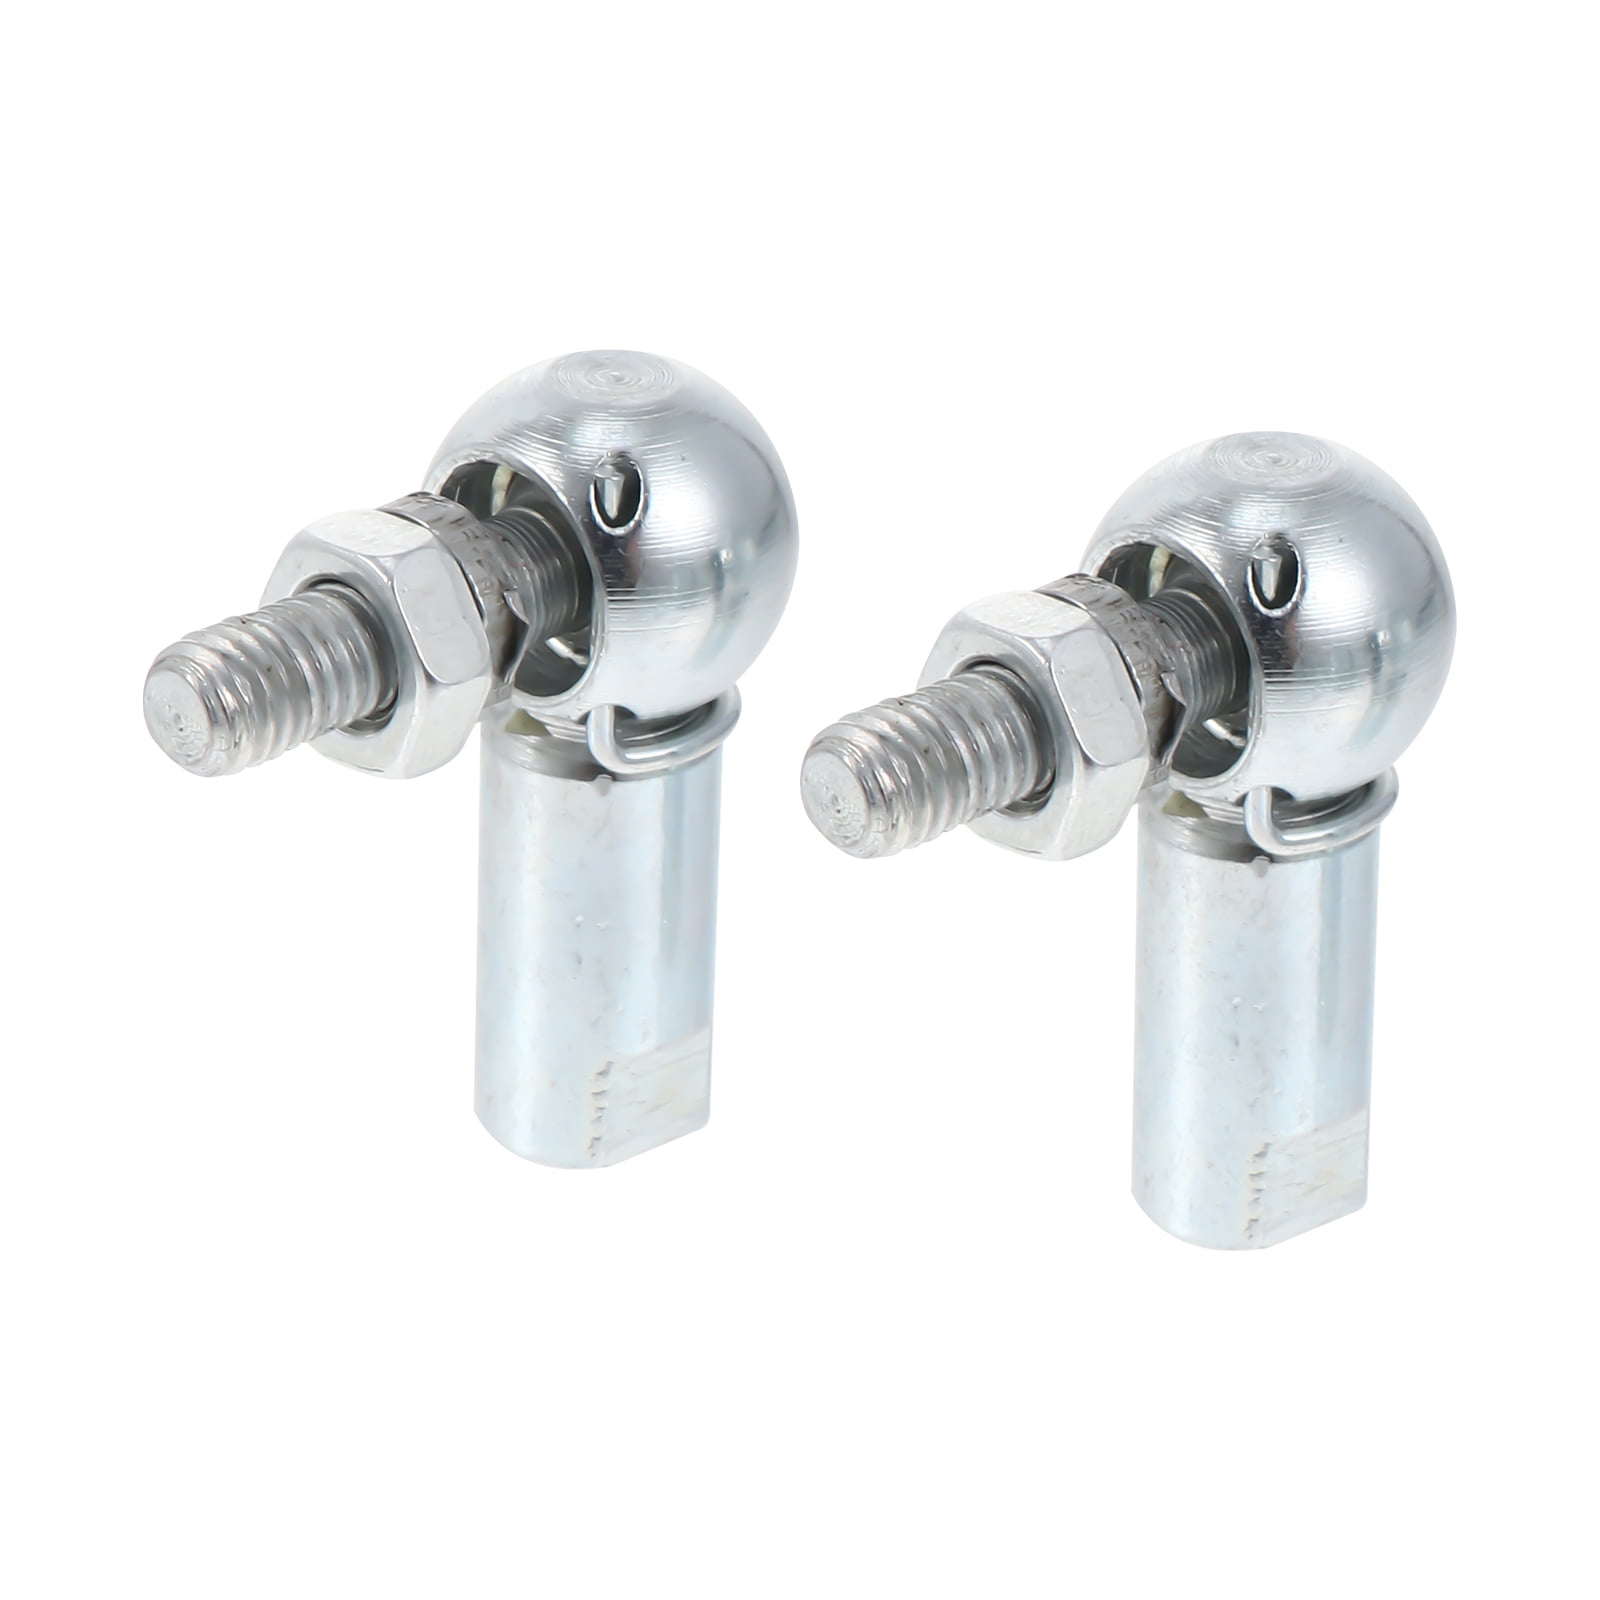 2pcs M5 Ball Joint Rod End Bearing Right-handed Rod End Ball Joint (Silver)  